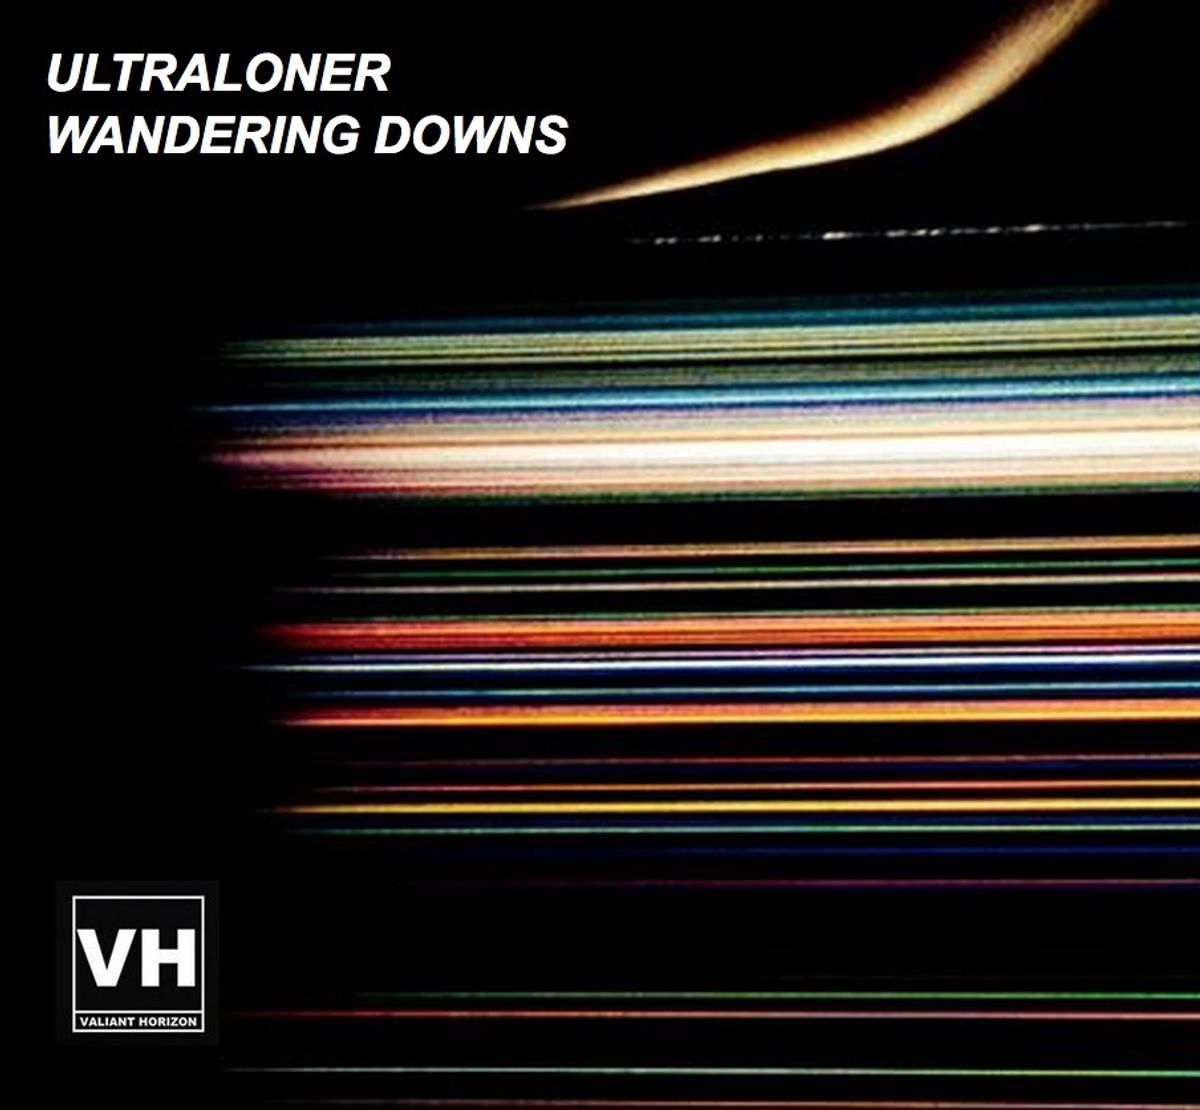 Ultraloner Unleashes The “Wandering Downs” EP